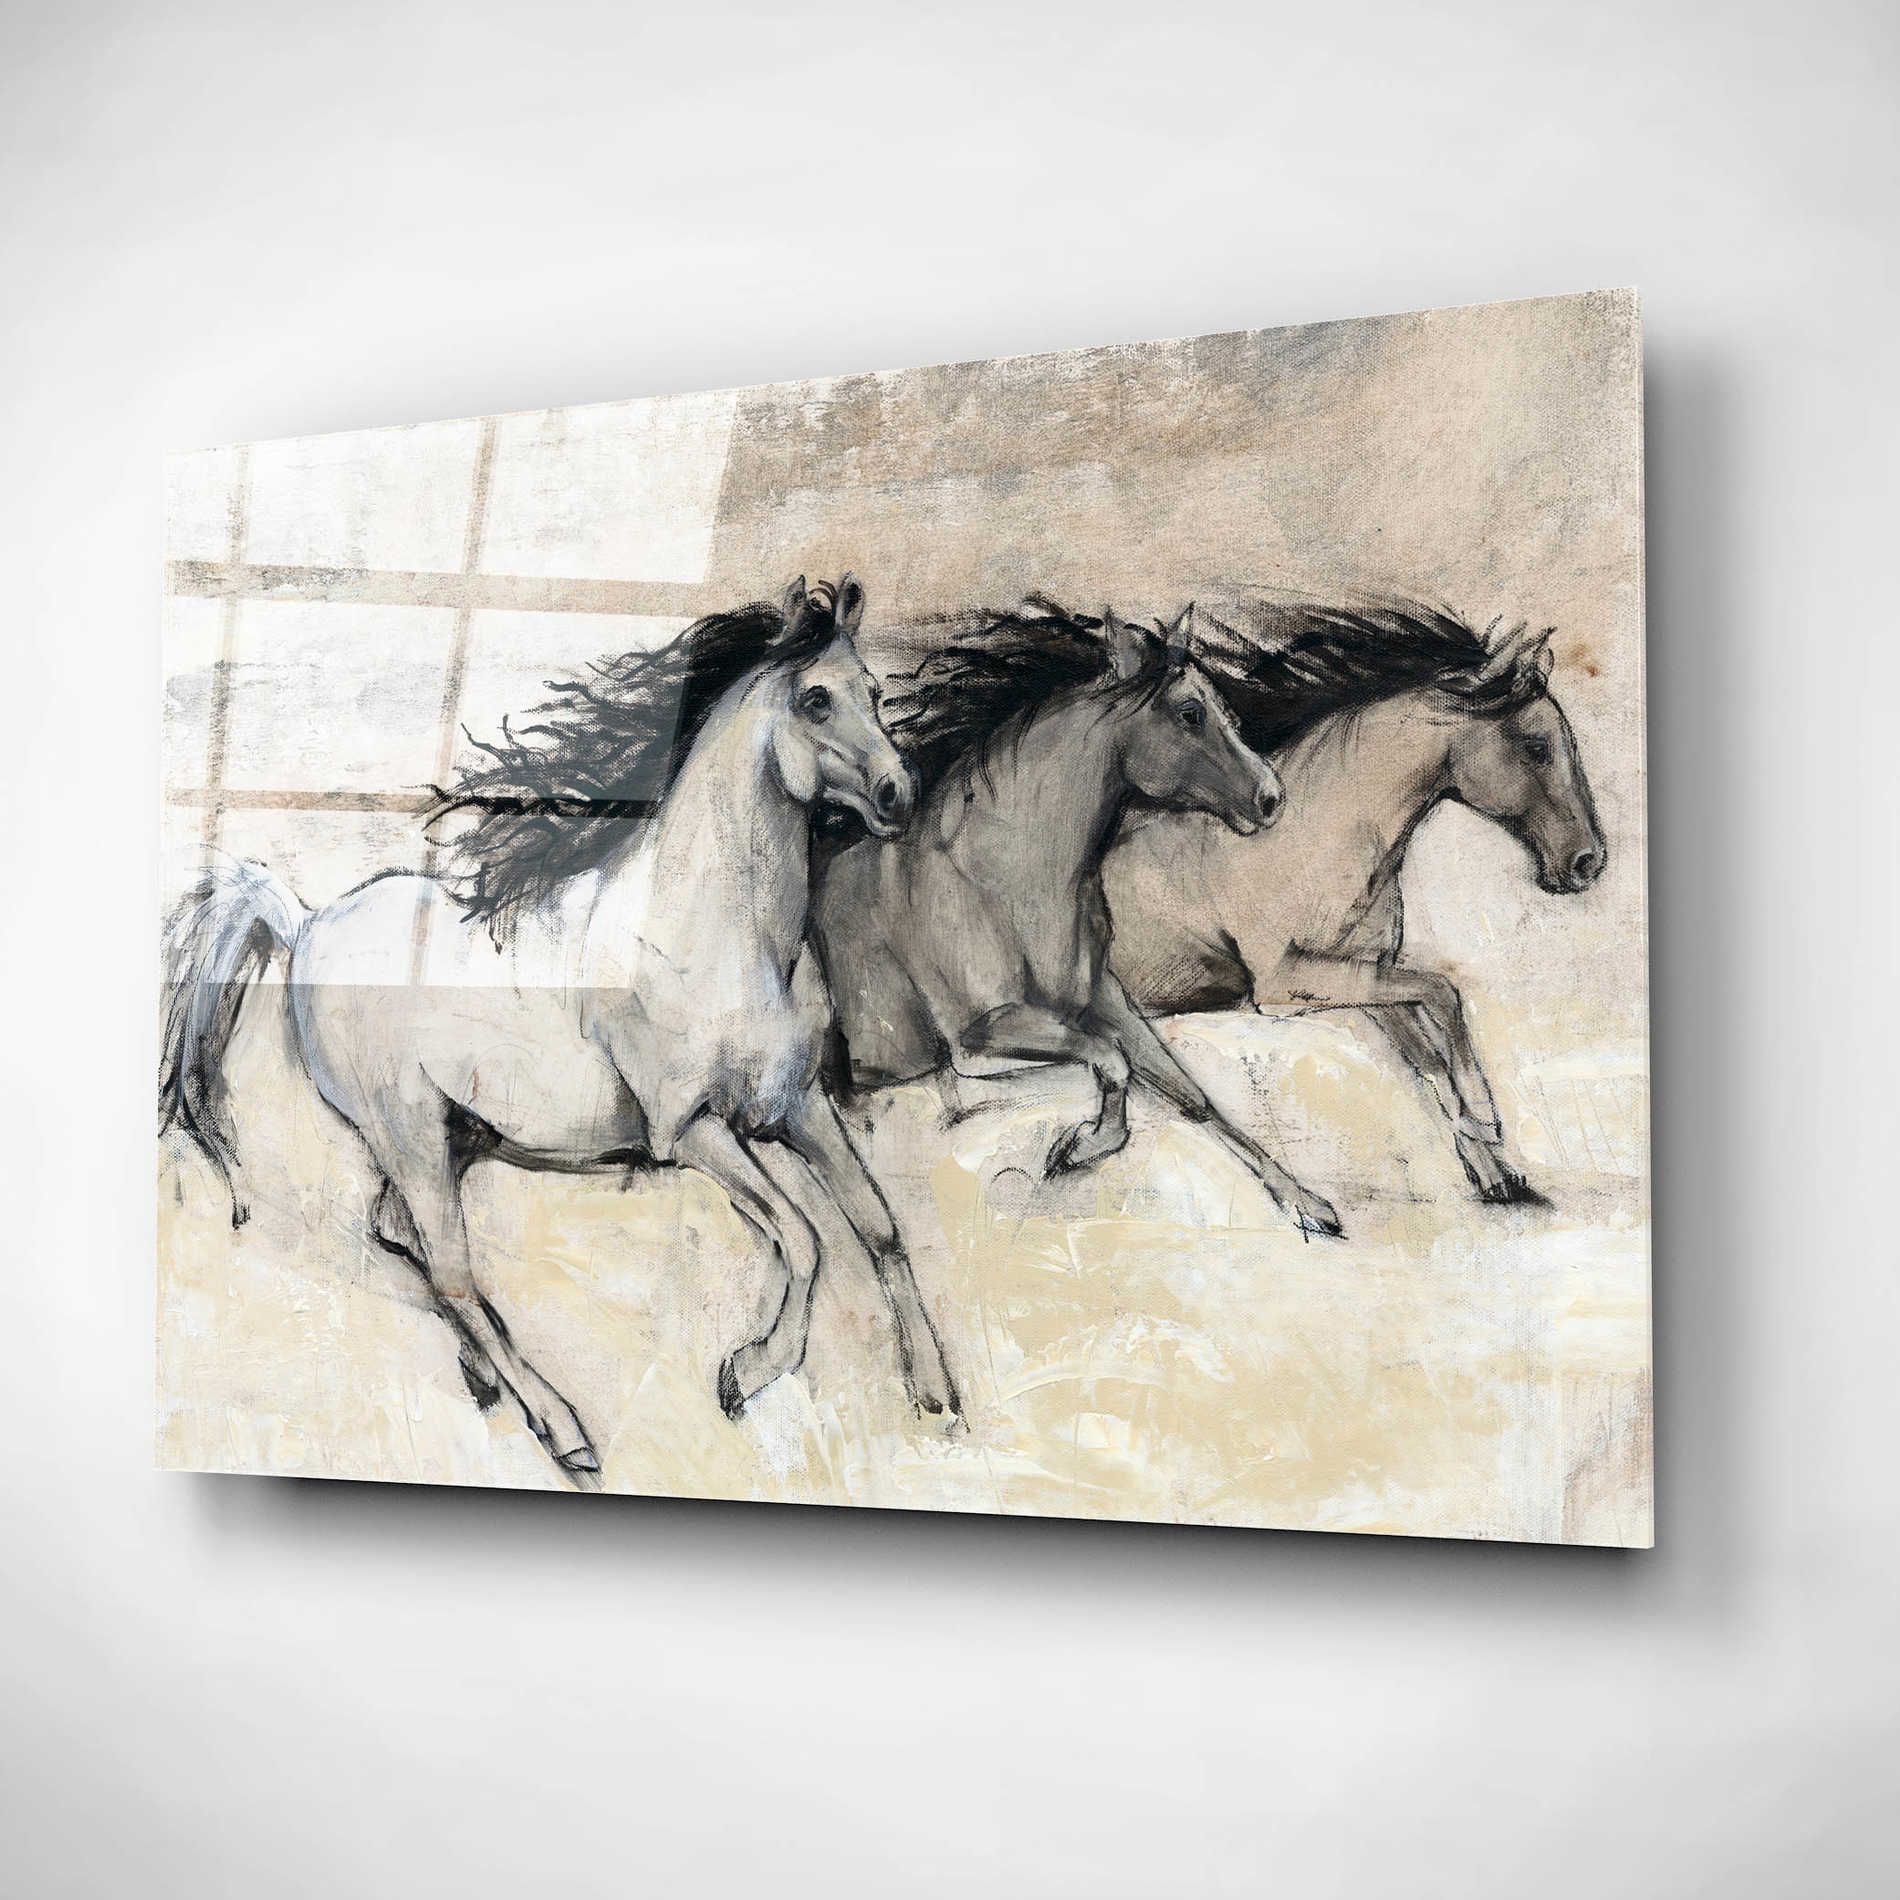 Epic Art 'Horses in Motion II' by Tim O'Toole, Acrylic Glass Wall Art,16x12